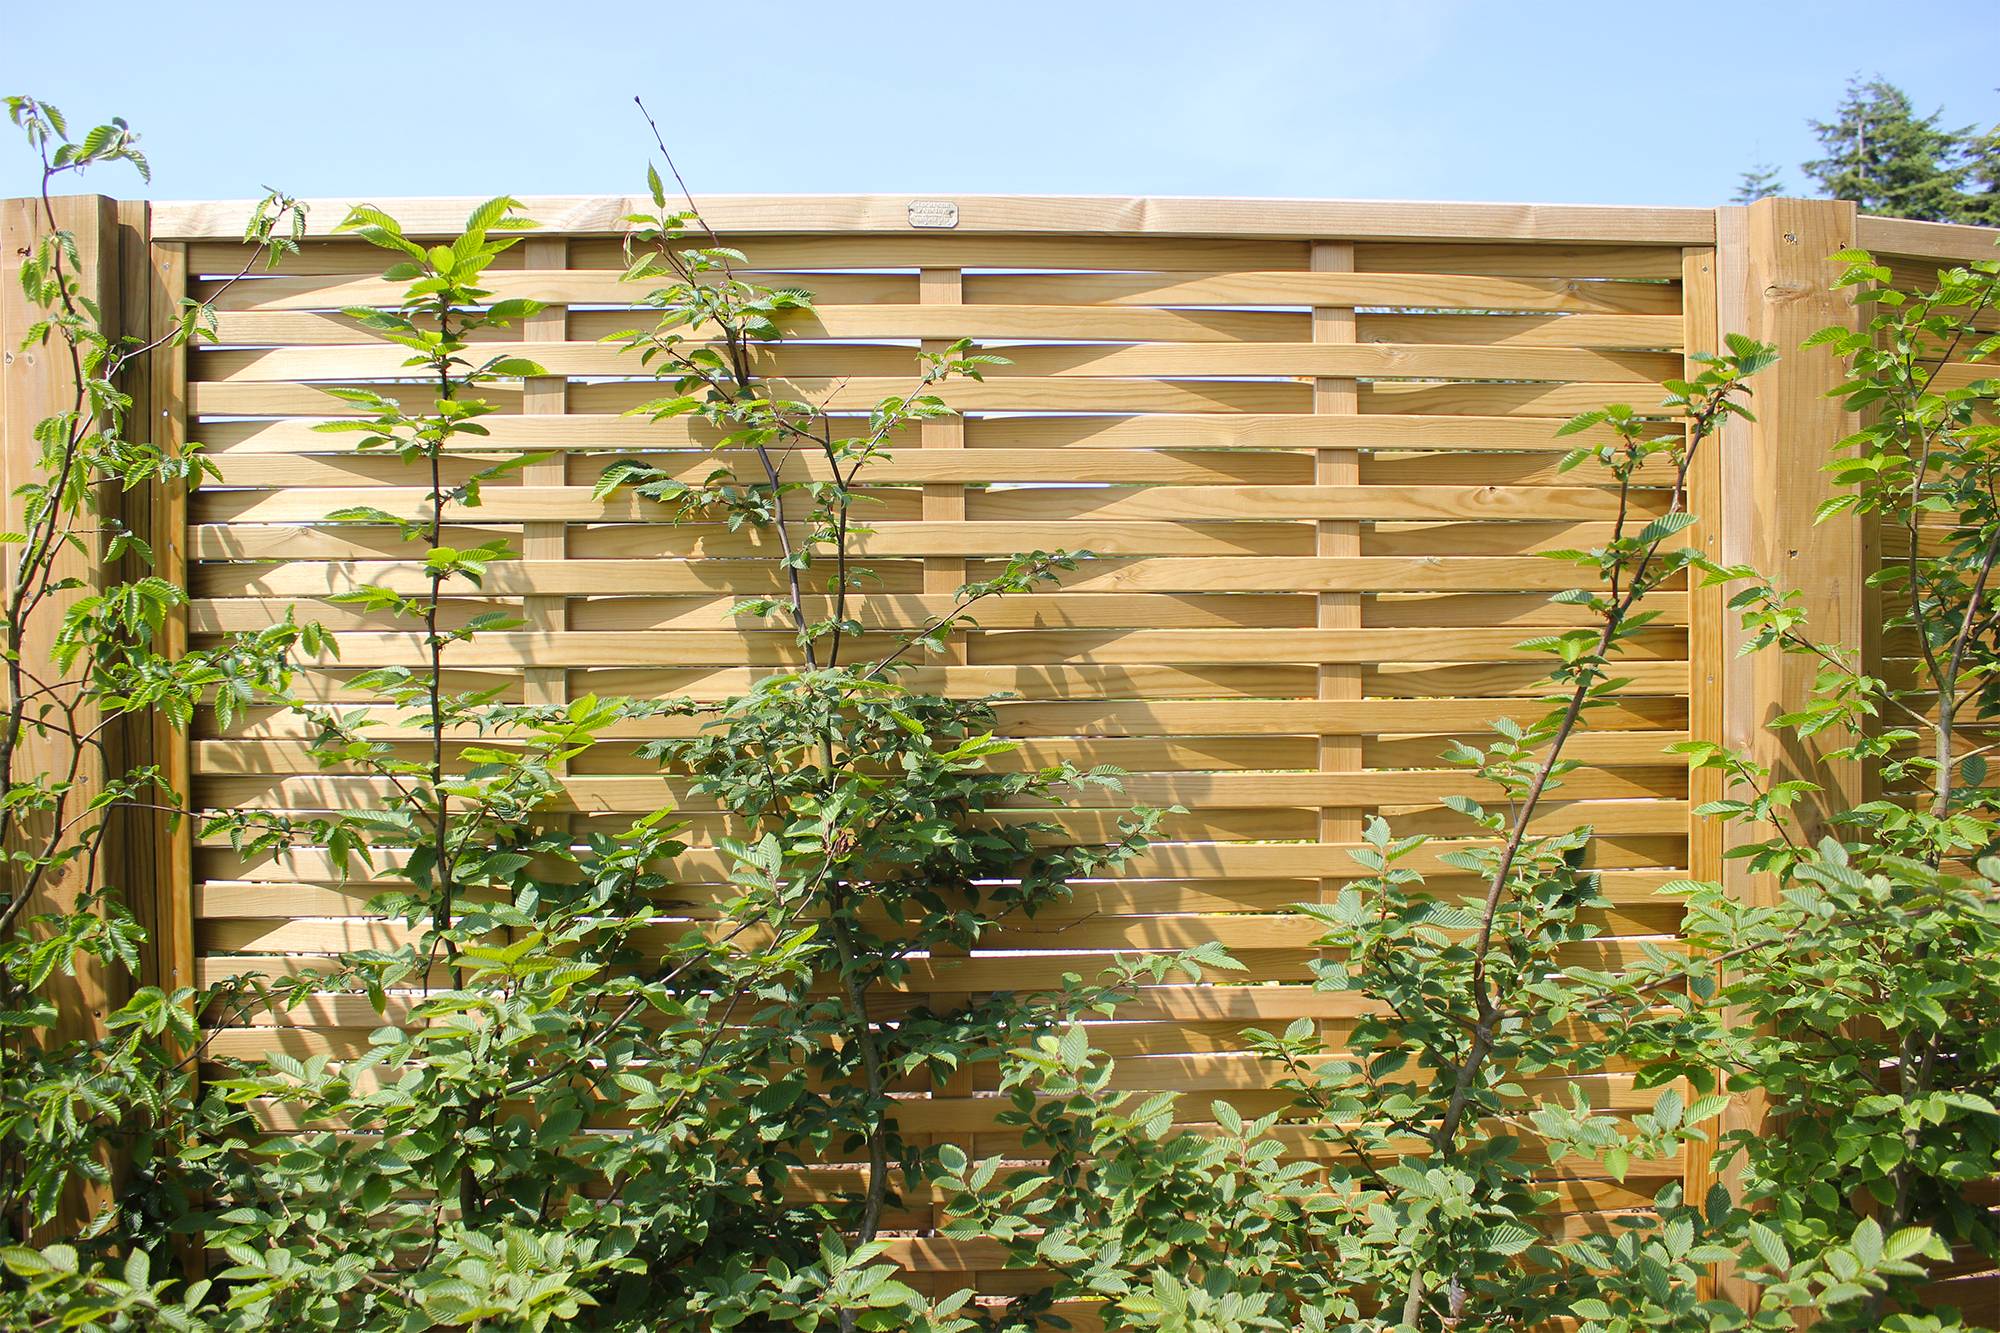 Woven Fence Panel and Gates - Timber fence panel